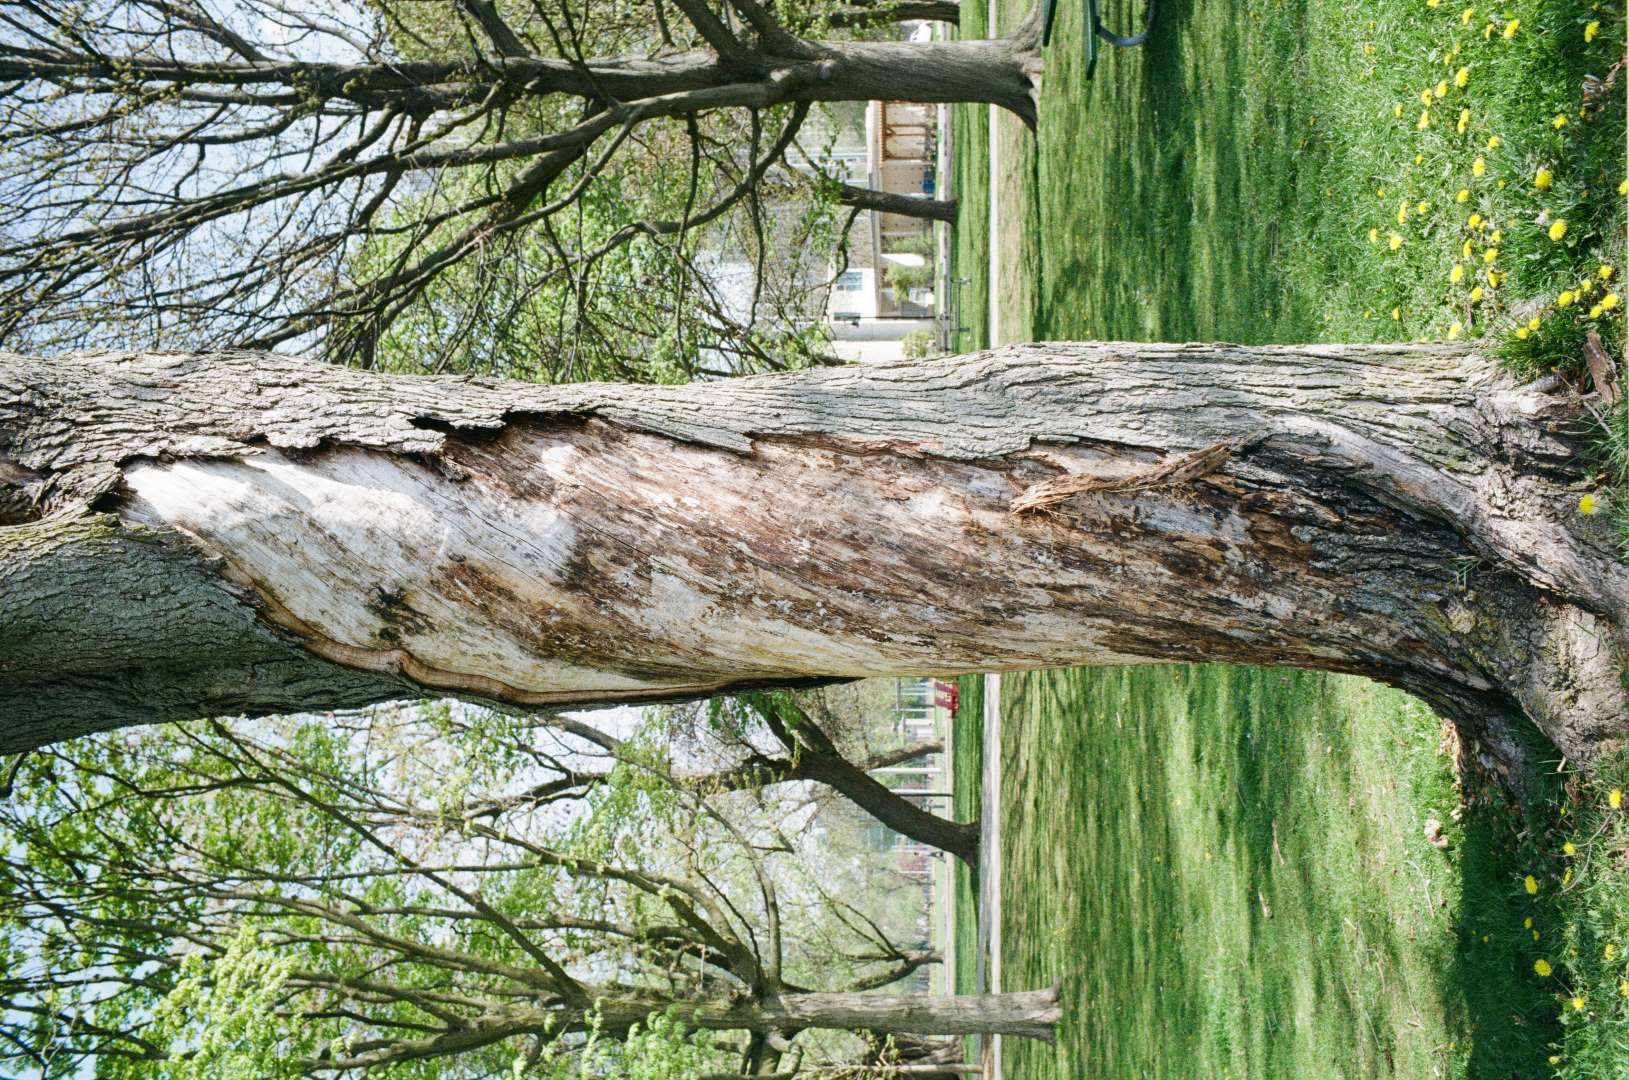 A colour photograph of a tree with it's bark stripped away